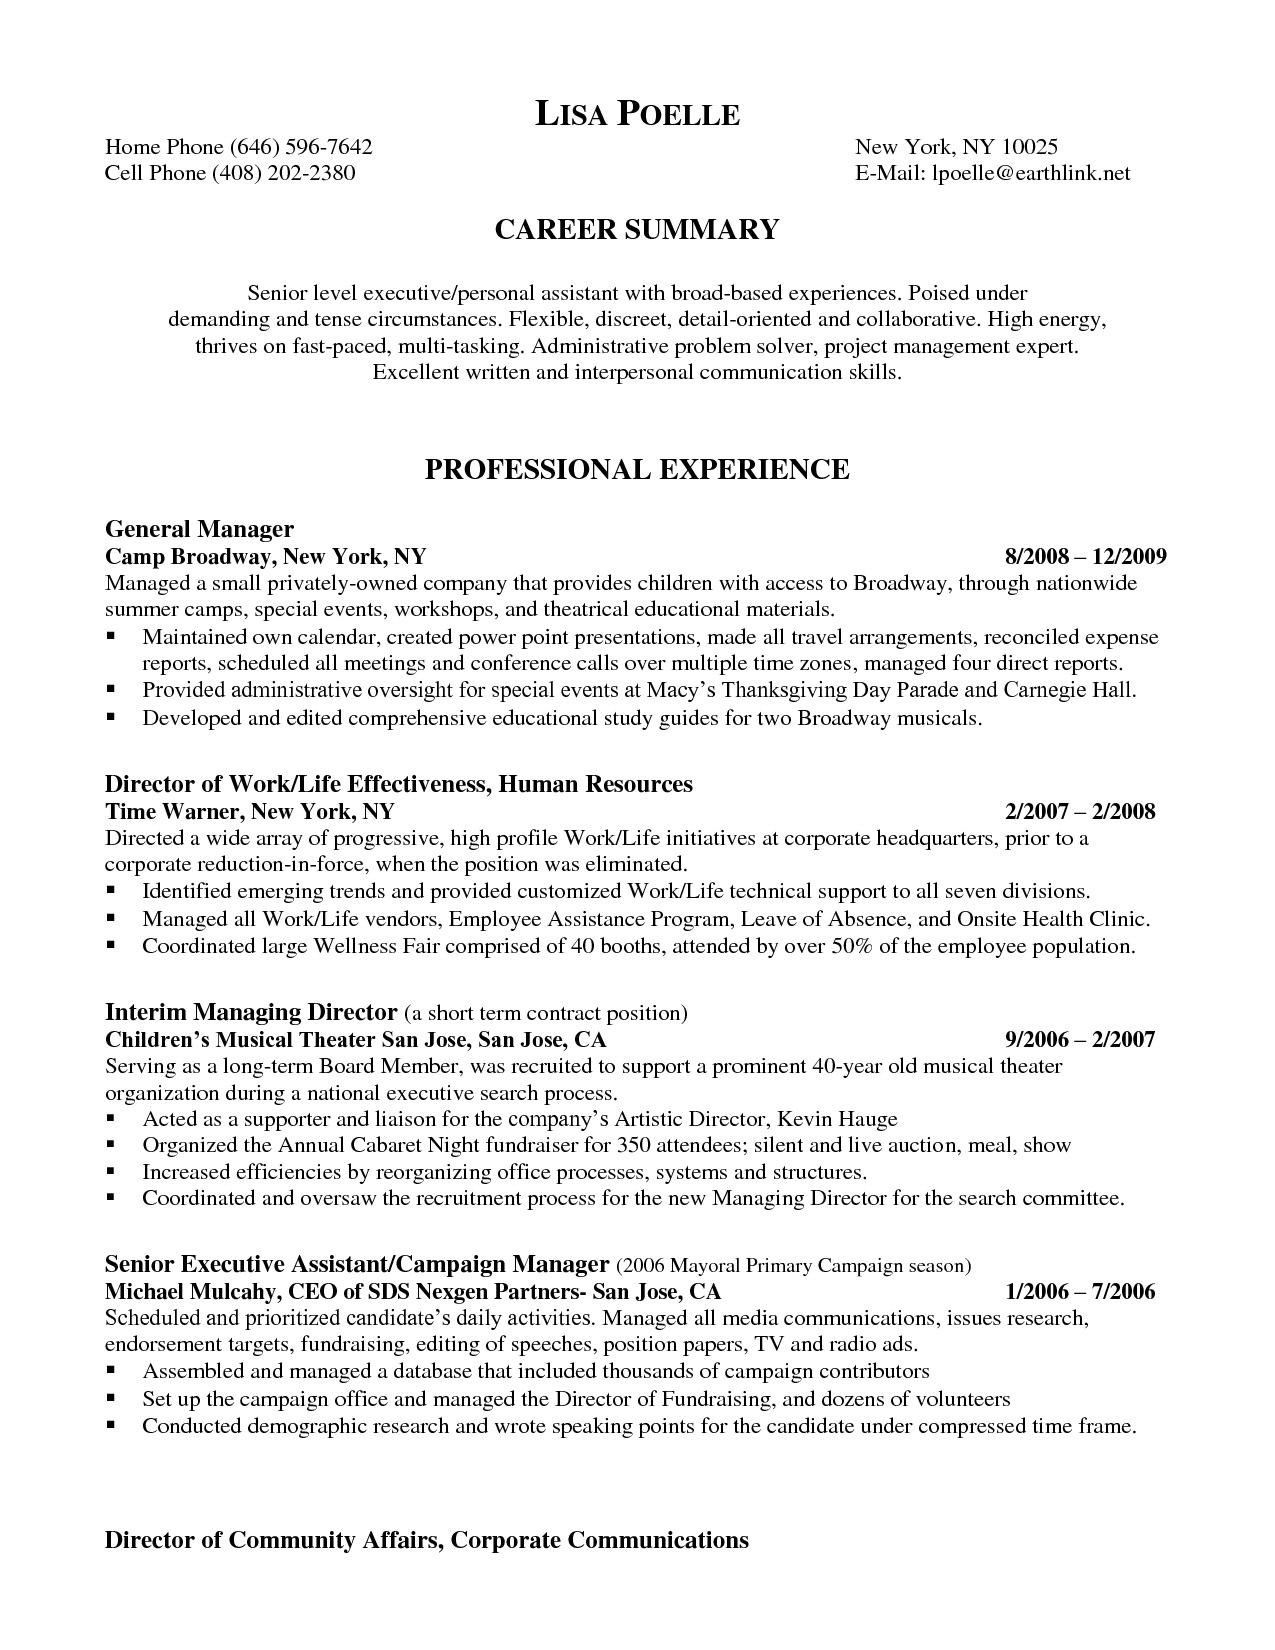 personal assistant resume examples application letter for without experience senior executive resumes